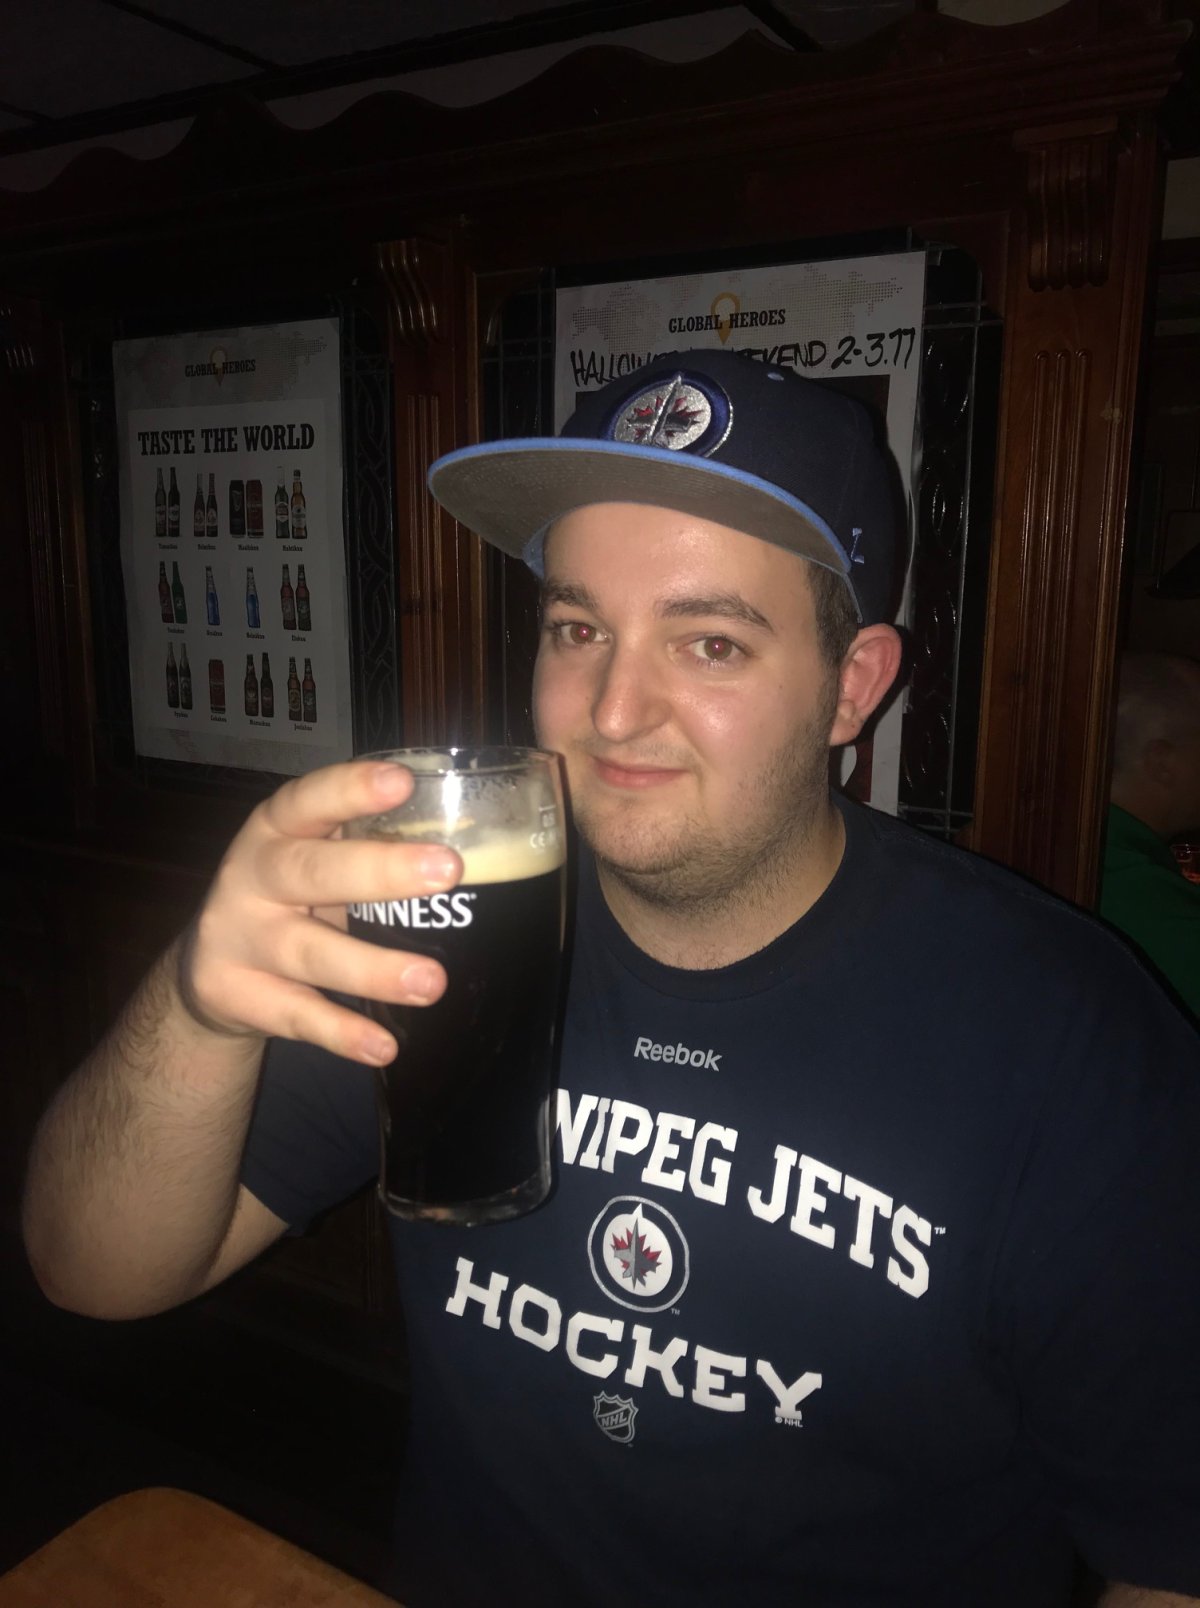 Jets fan Ben Gray, from Newcastle, England, made the trek to Finland to see his beloved team in person.